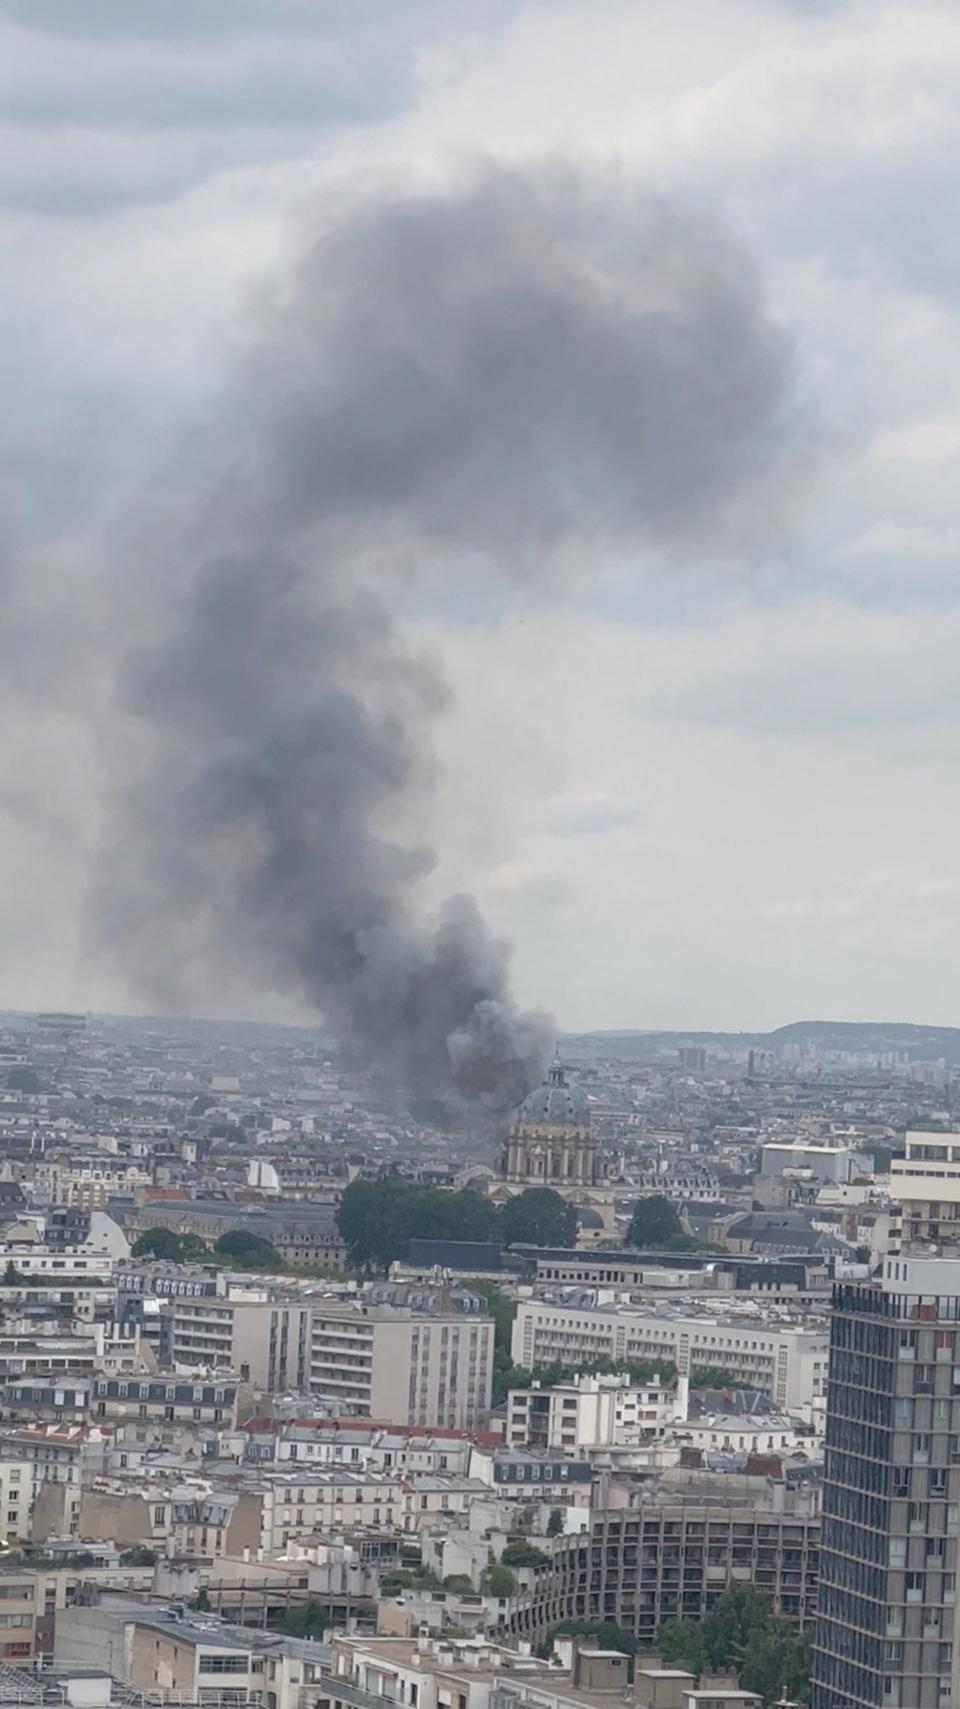 Smoke from the explosion curled up into the sky over the landmarks of Paris (via REUTERS)